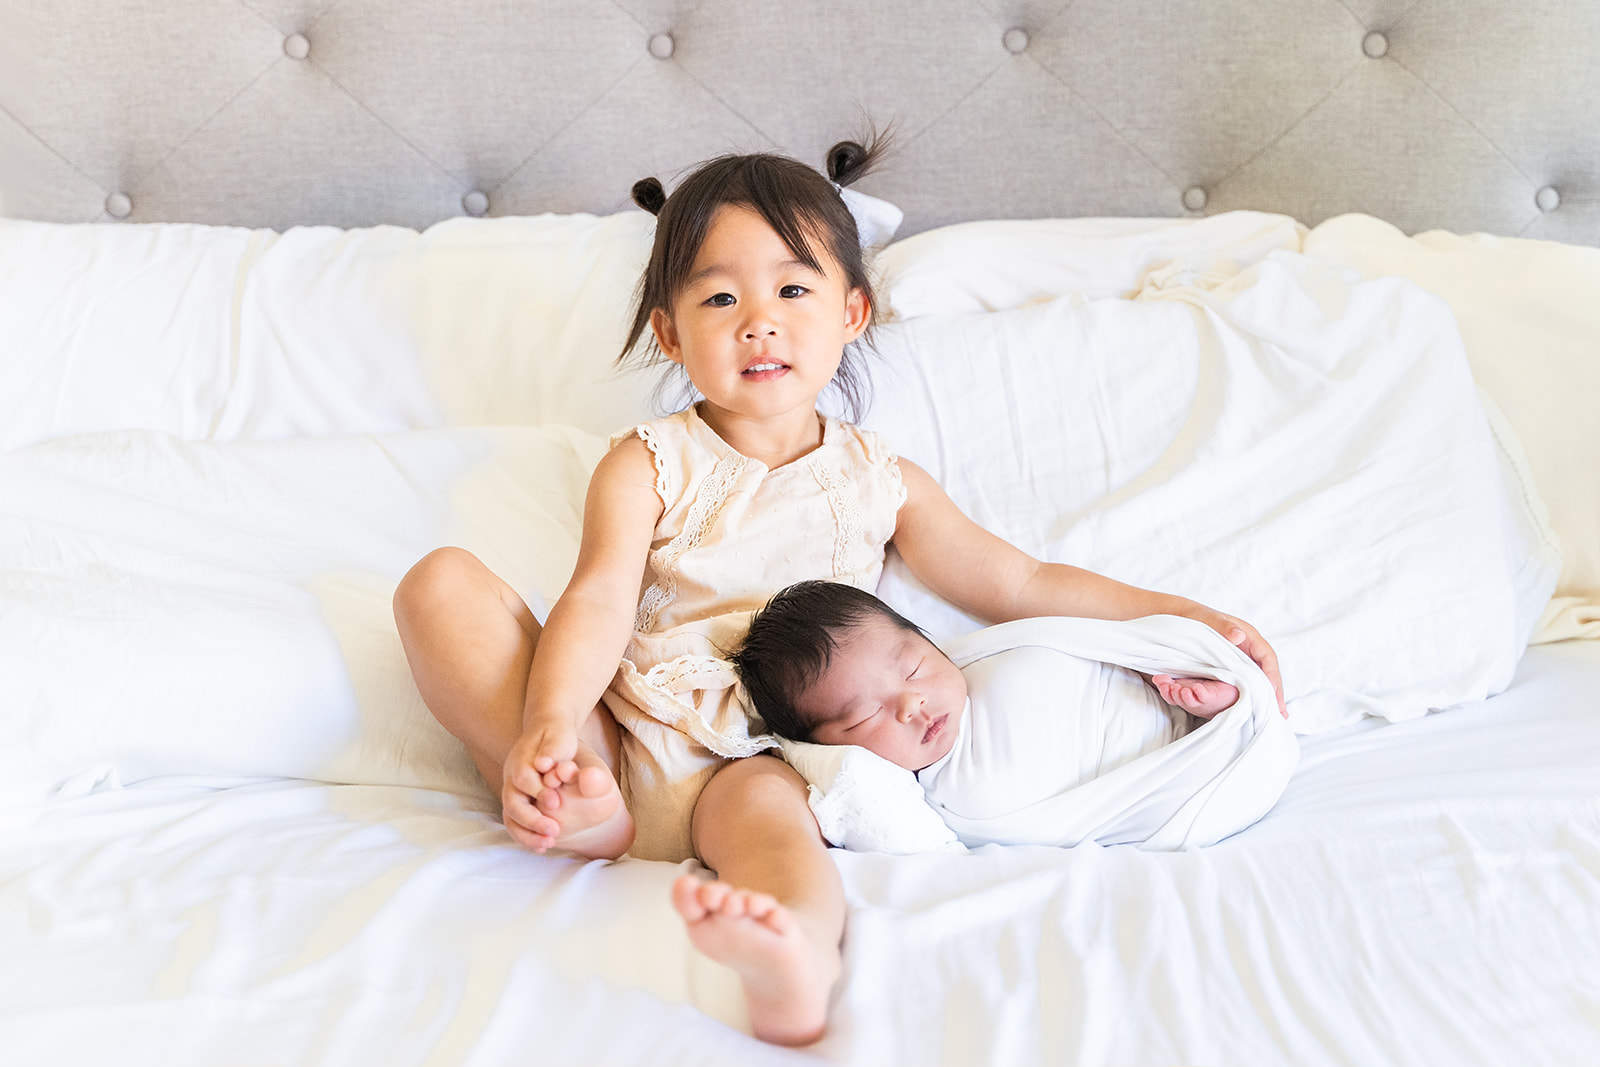 A young toddler girls in a white dress sits on a bed with an arm around her sleeping newborn sibling on her lap